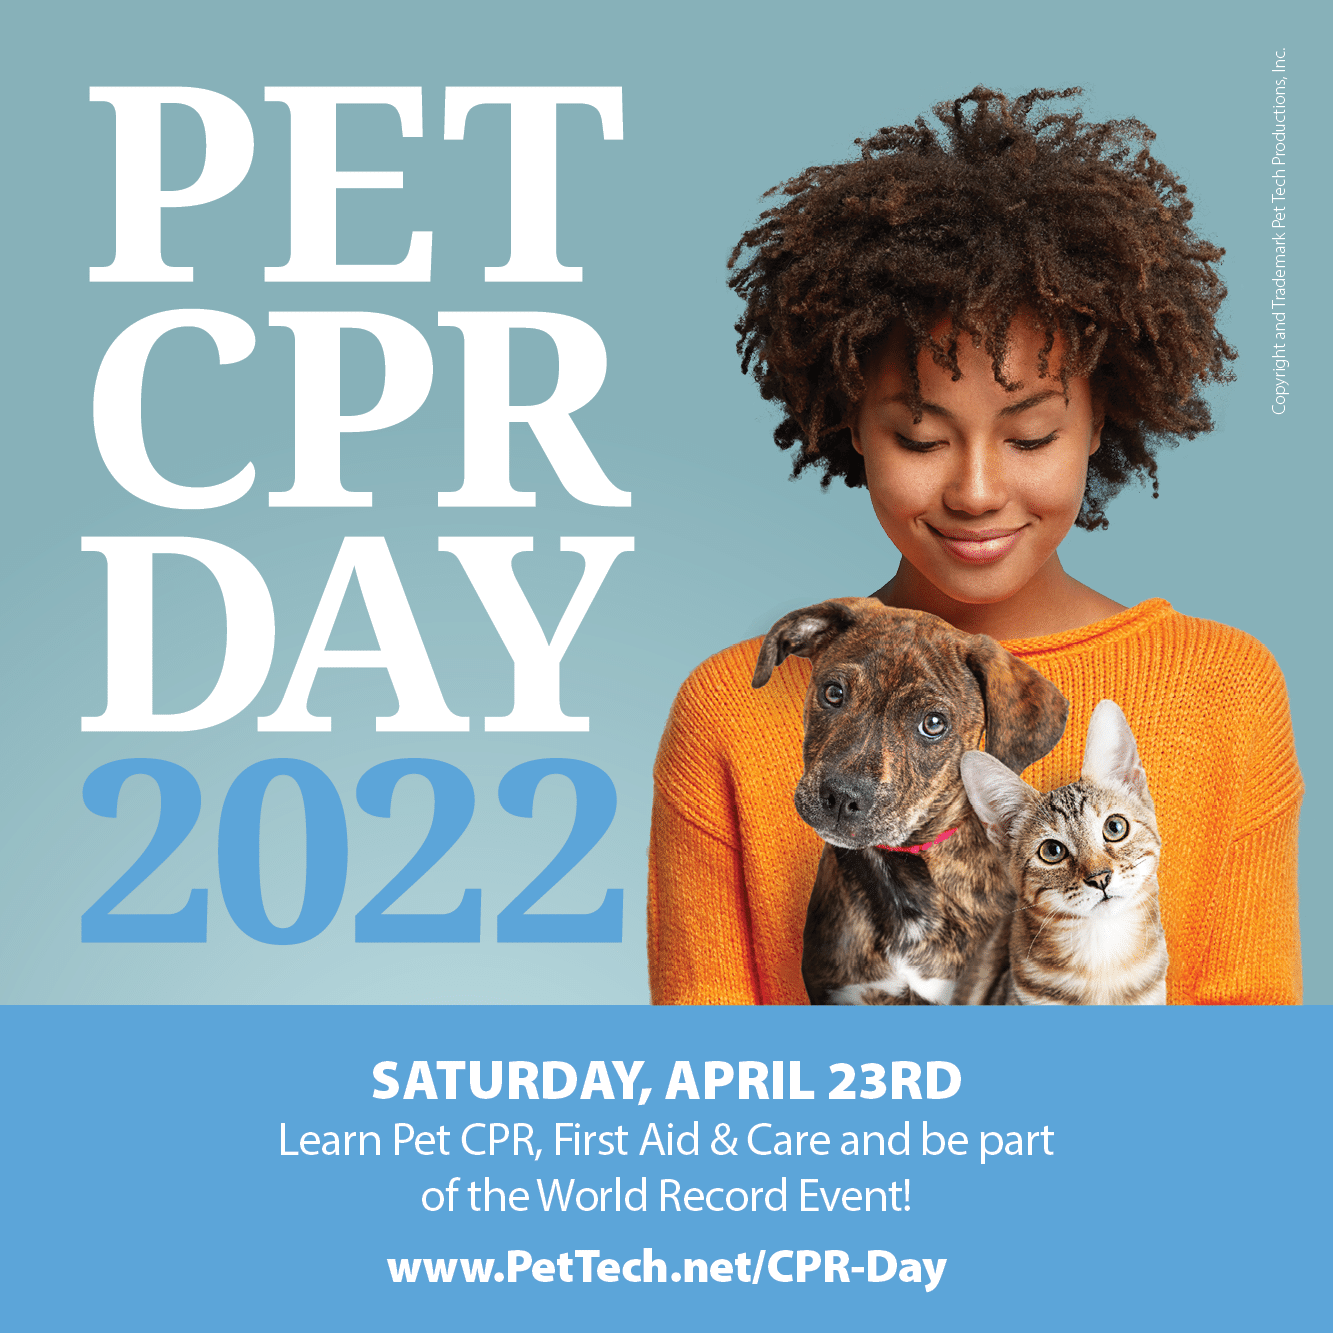 Pet CPR Day 2022